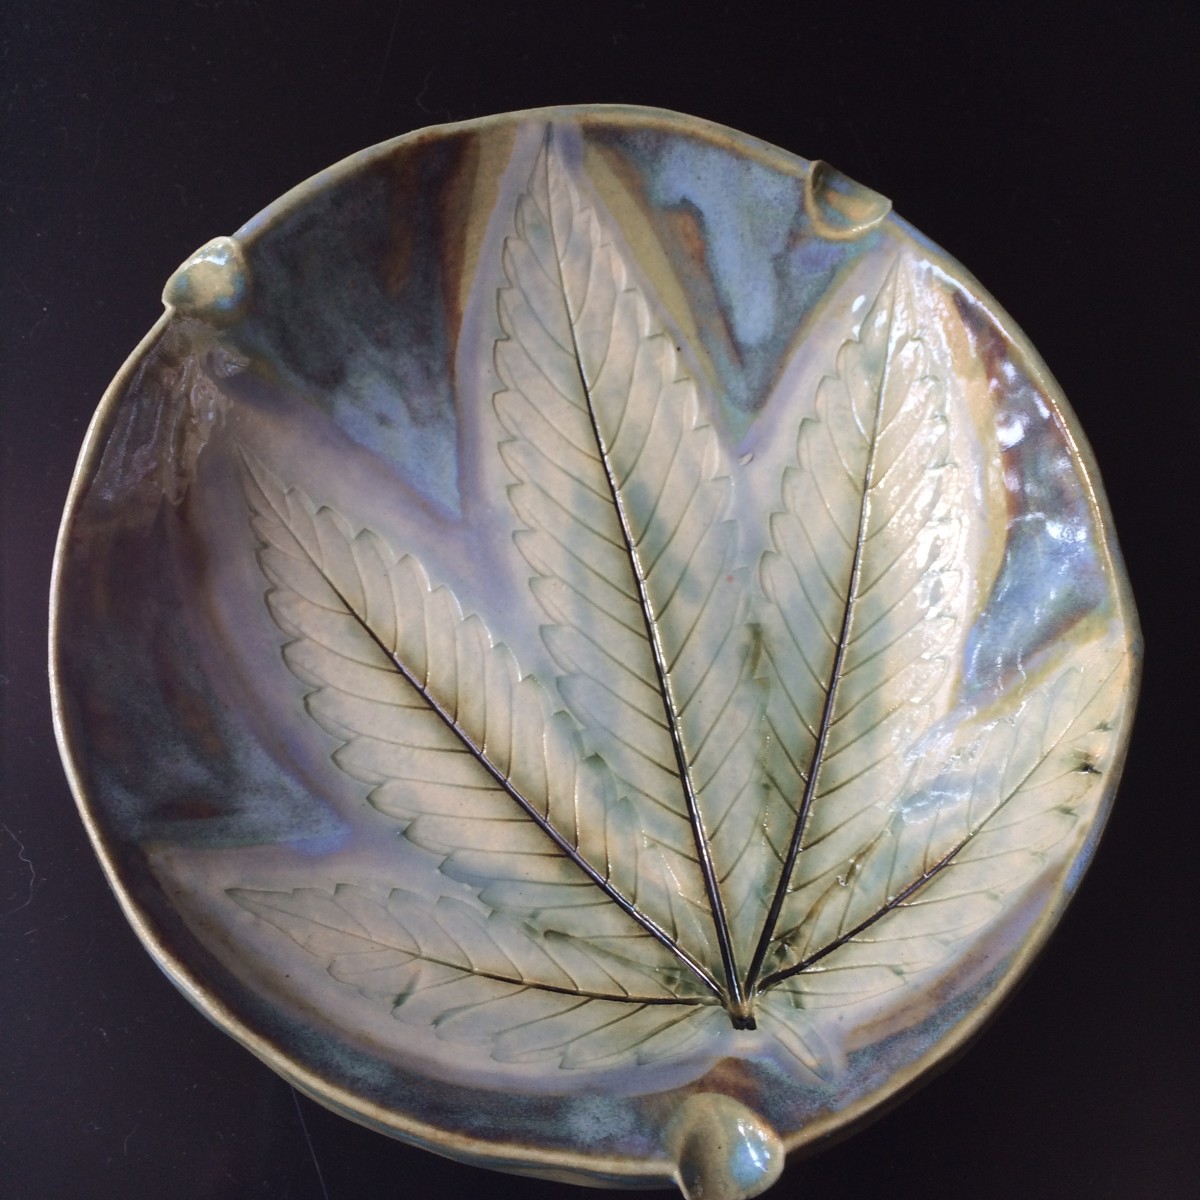 Light and lovely 420 leaf impression ash tray by Nell Eakin 